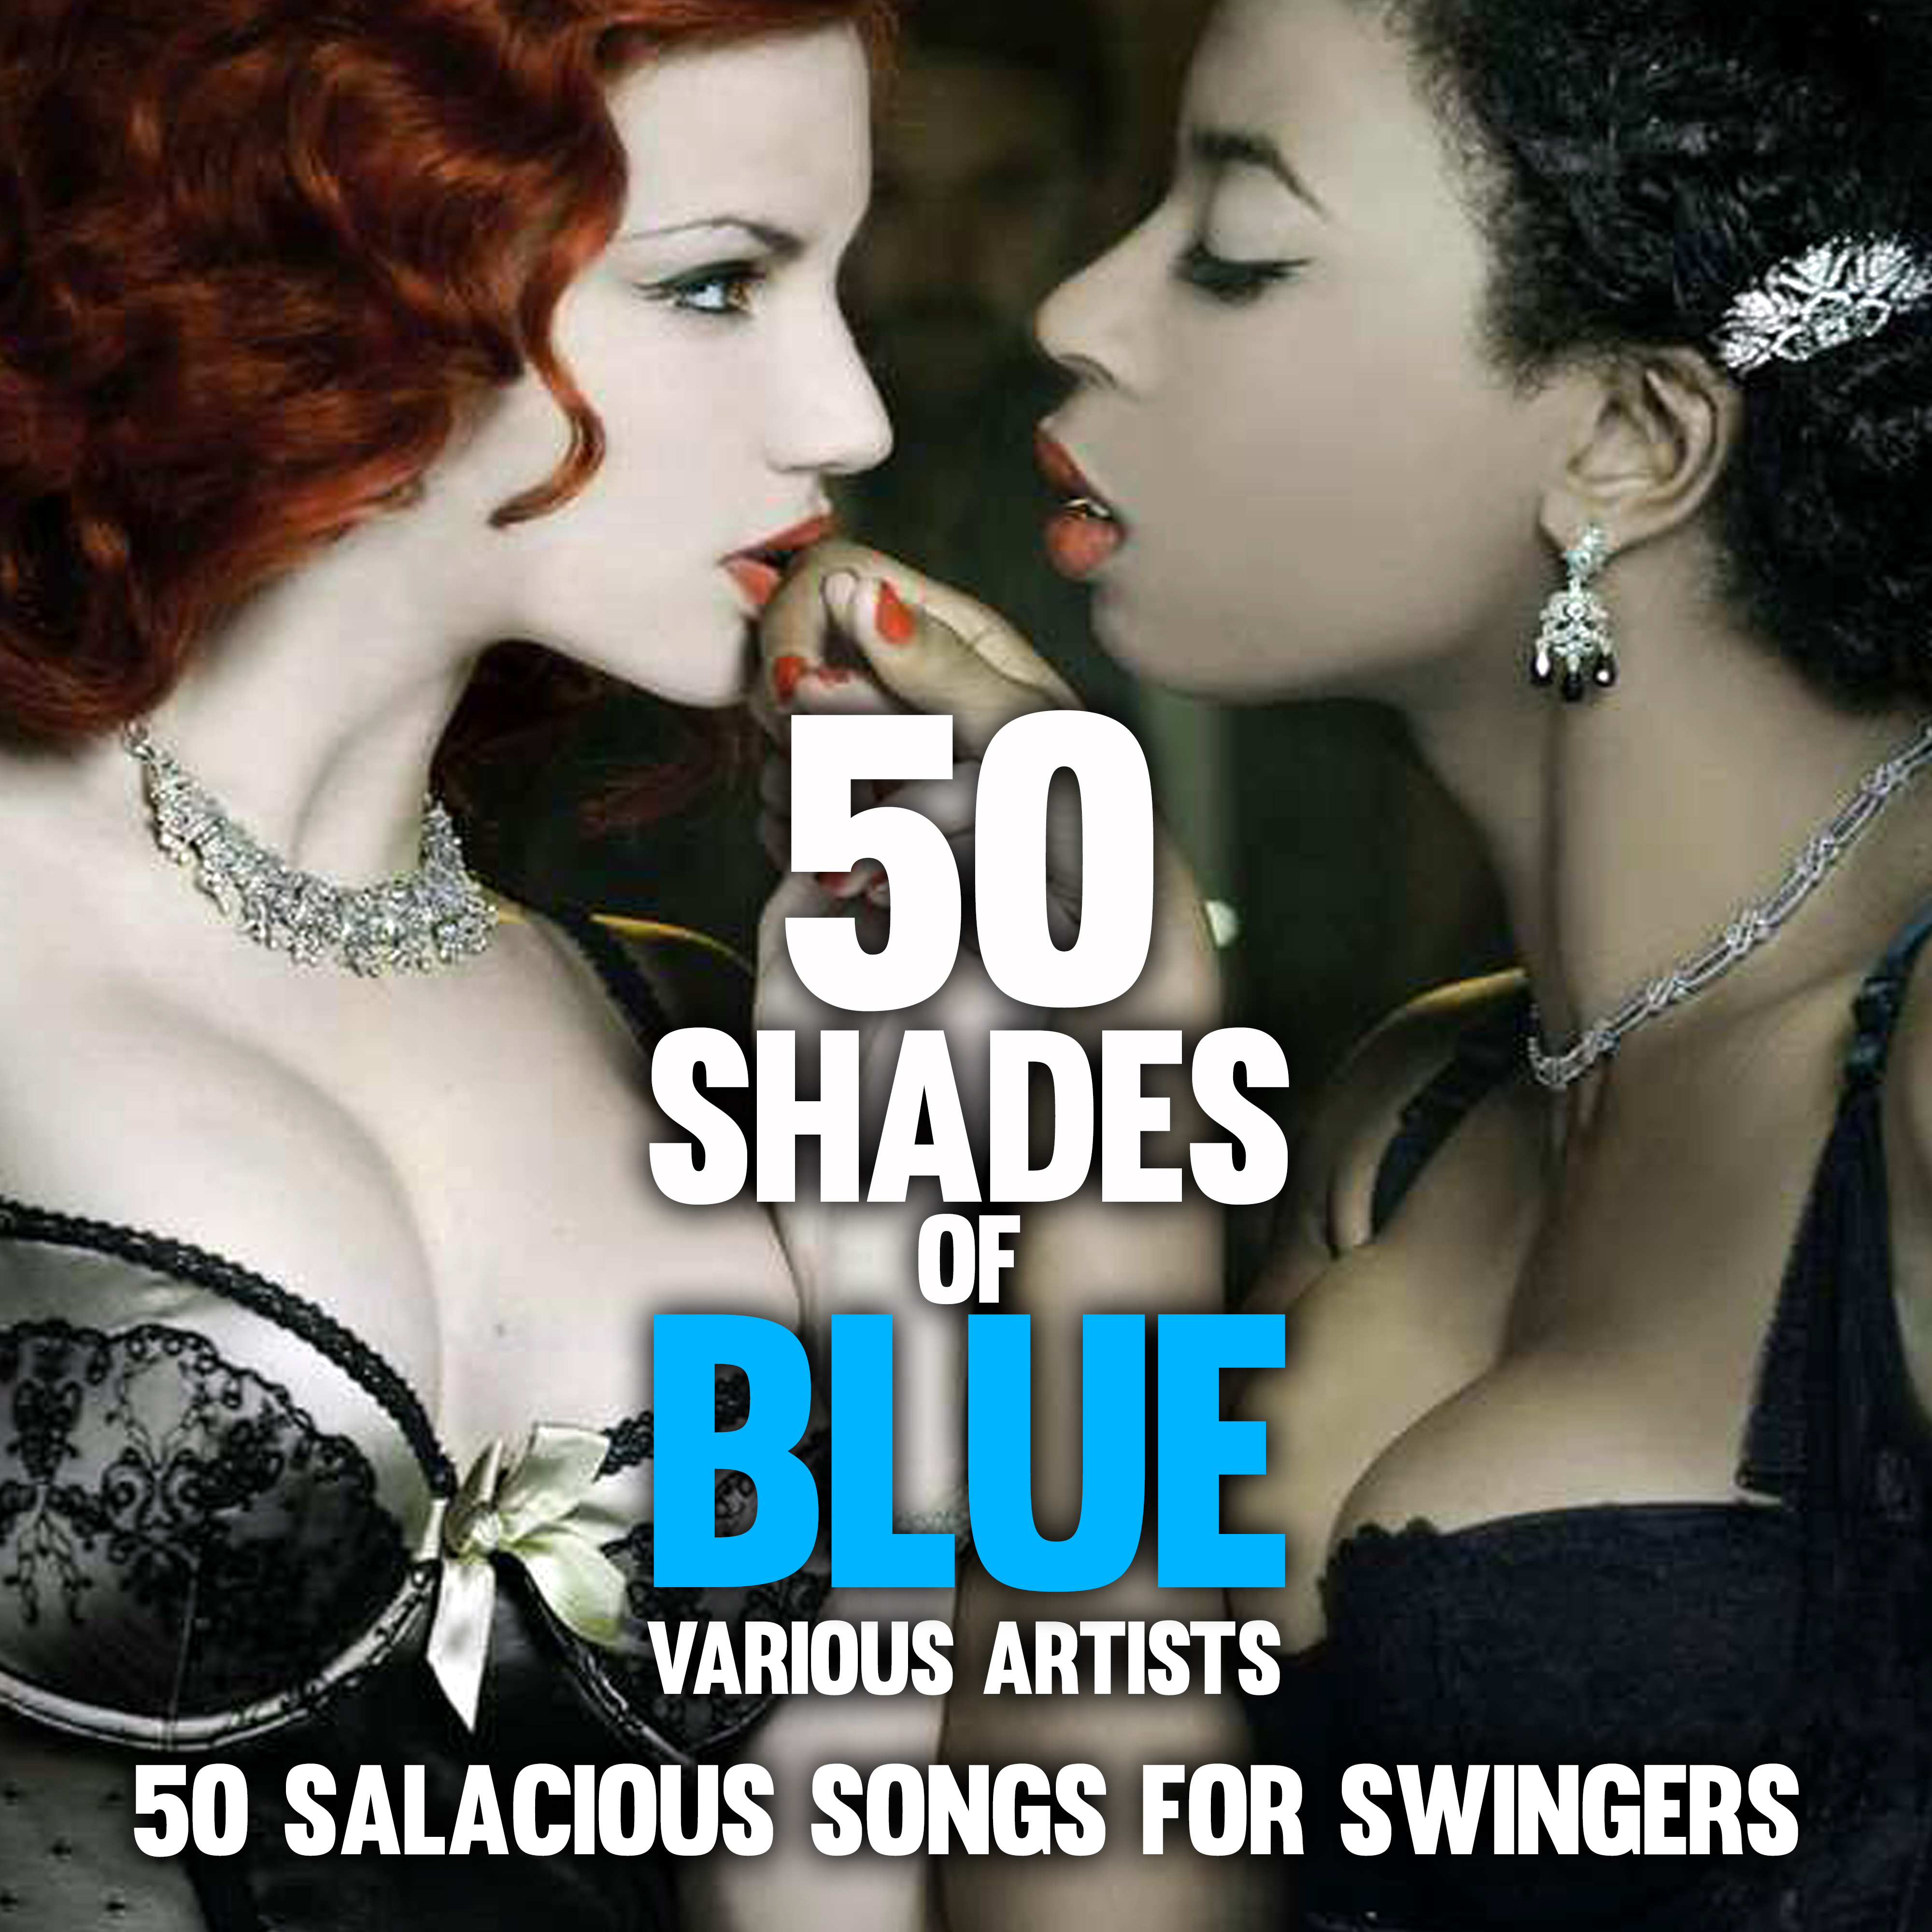 Fifty Shades of Blue : 50 Salacious Songs for Swingers